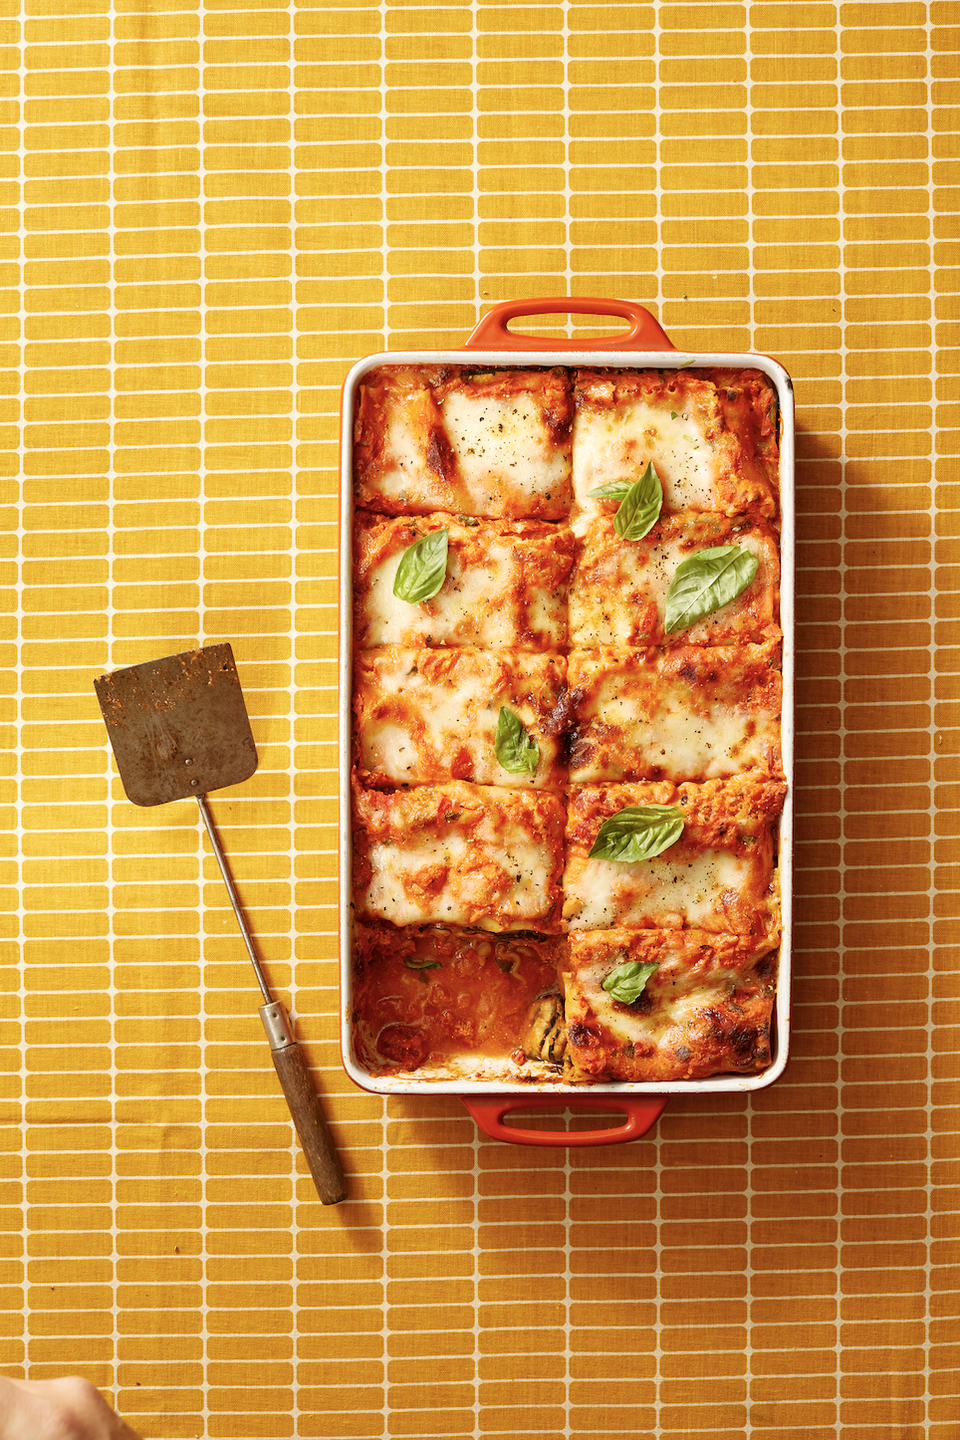 Grilled Vegetable Lasagna with Ricotta-Tomato Sauce